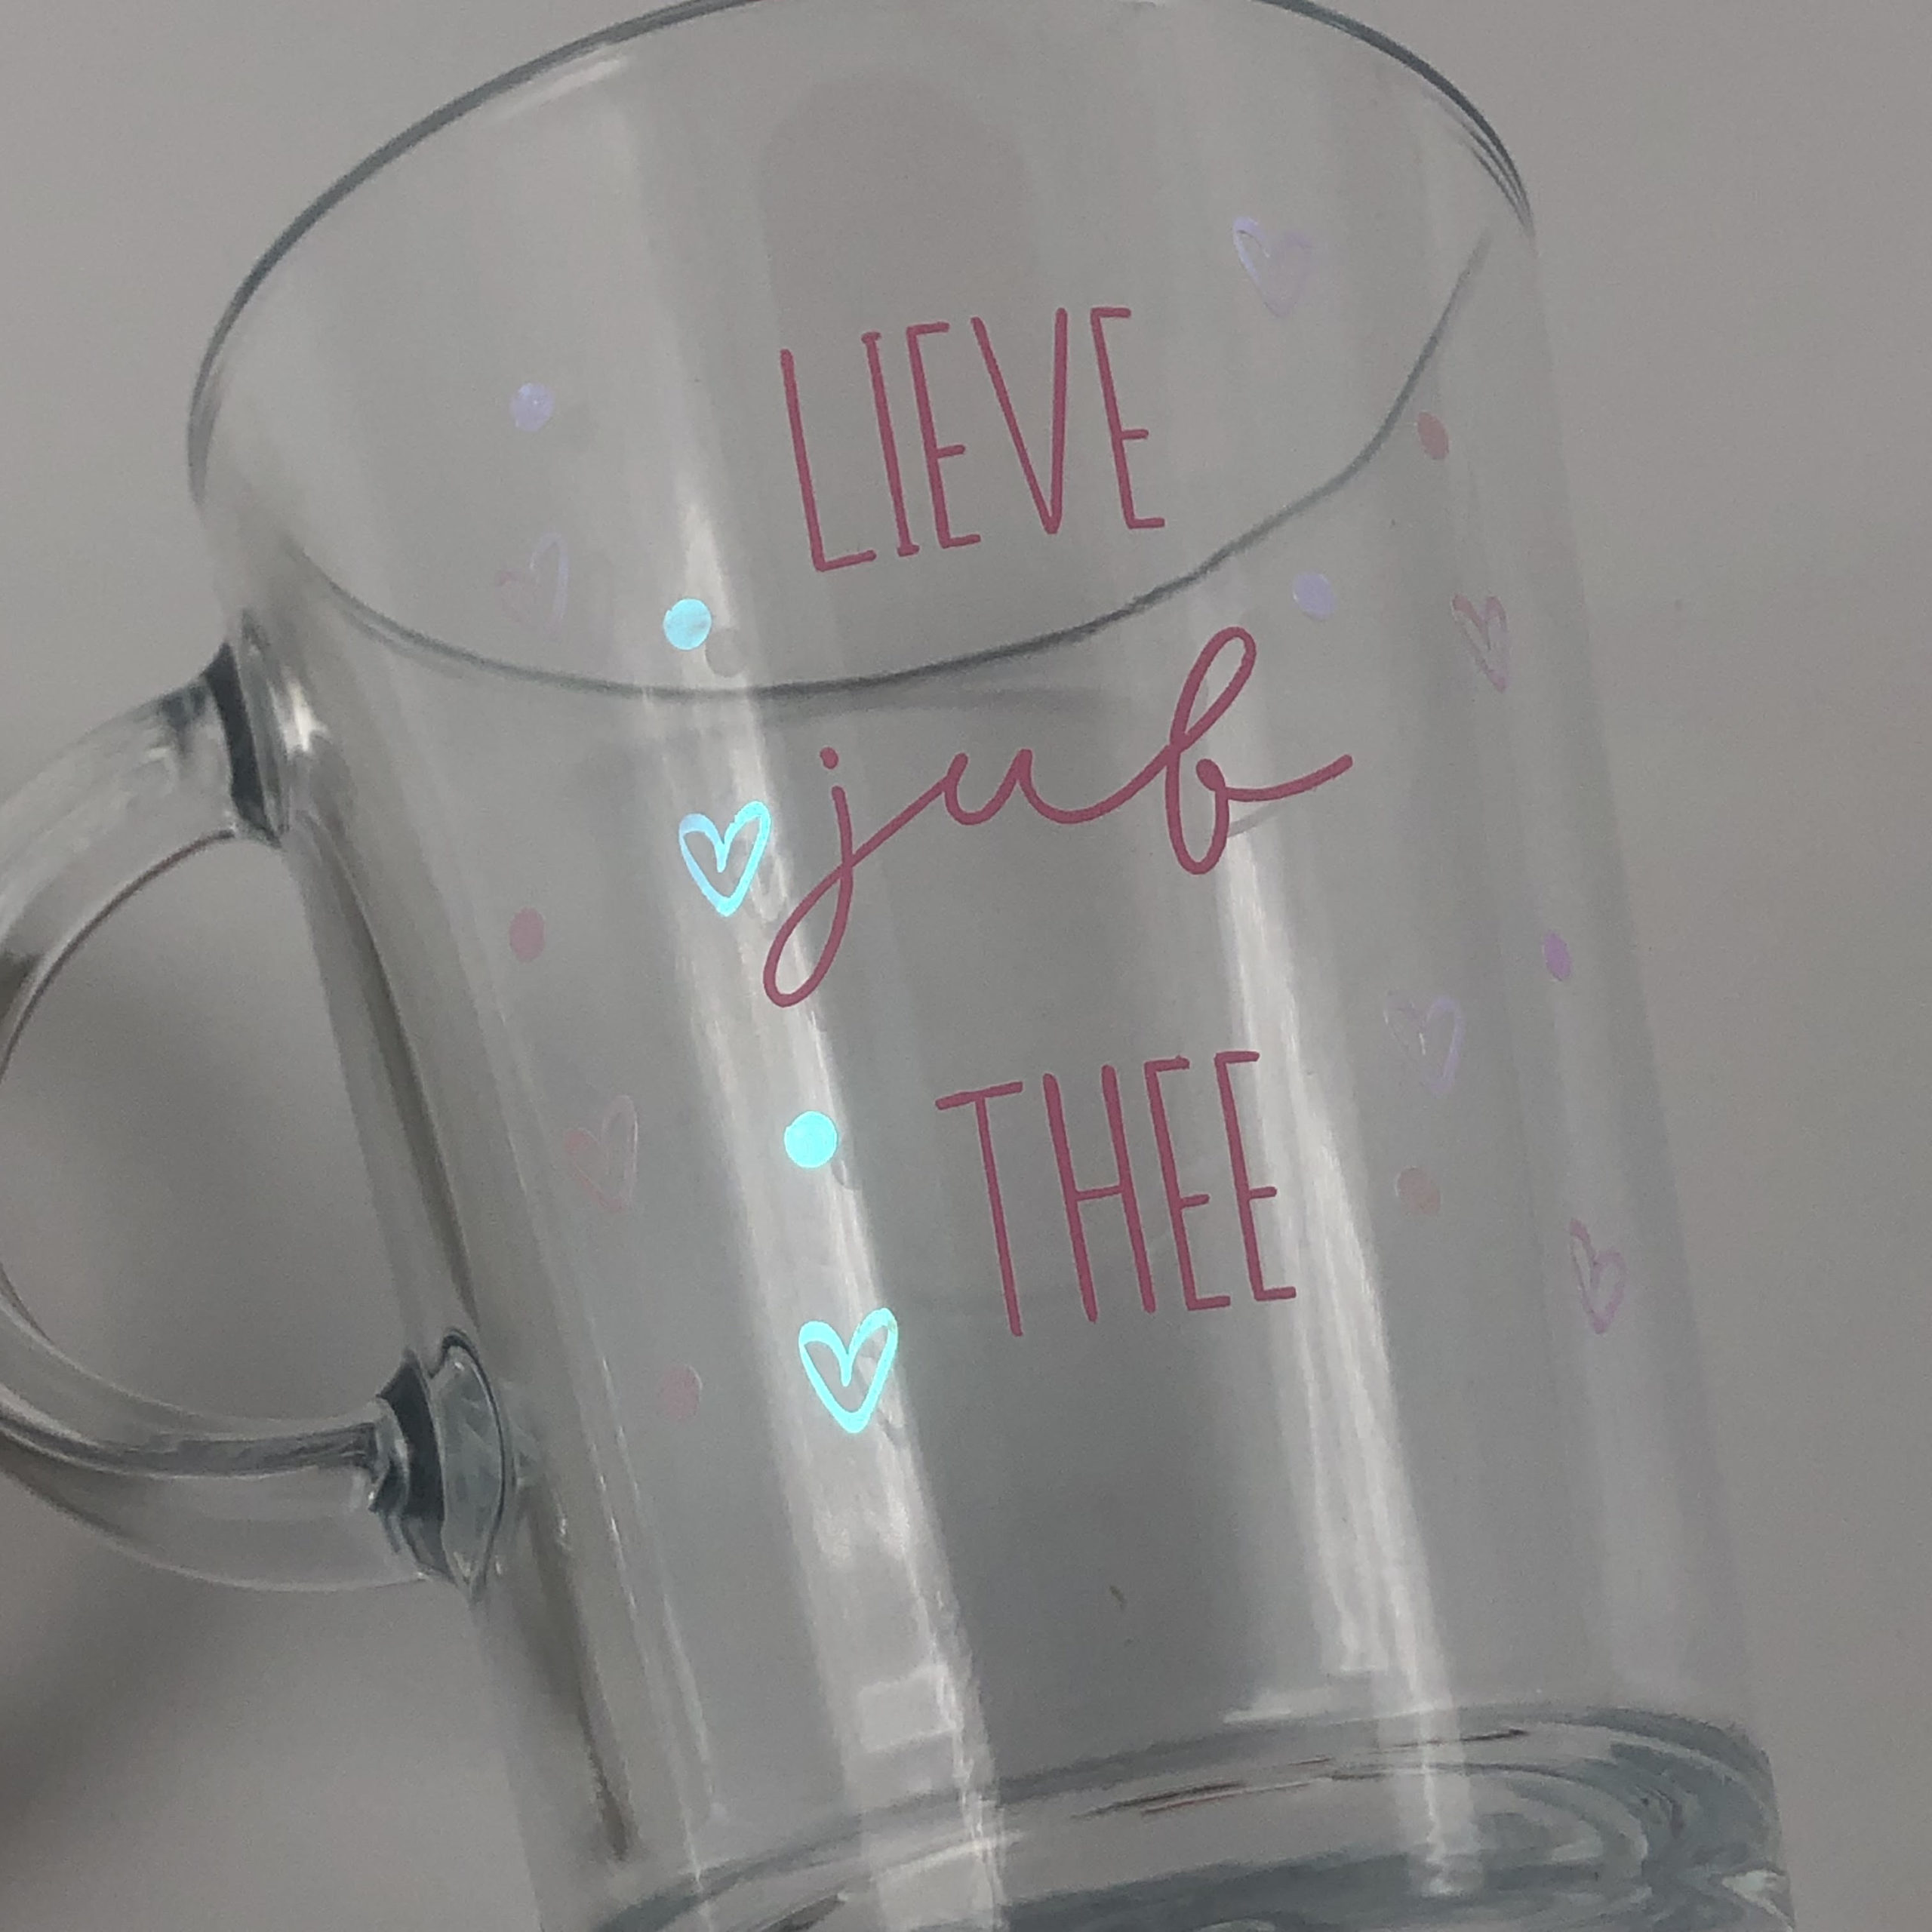 Thee glas | Lieve Oma/Mama/Juf thee